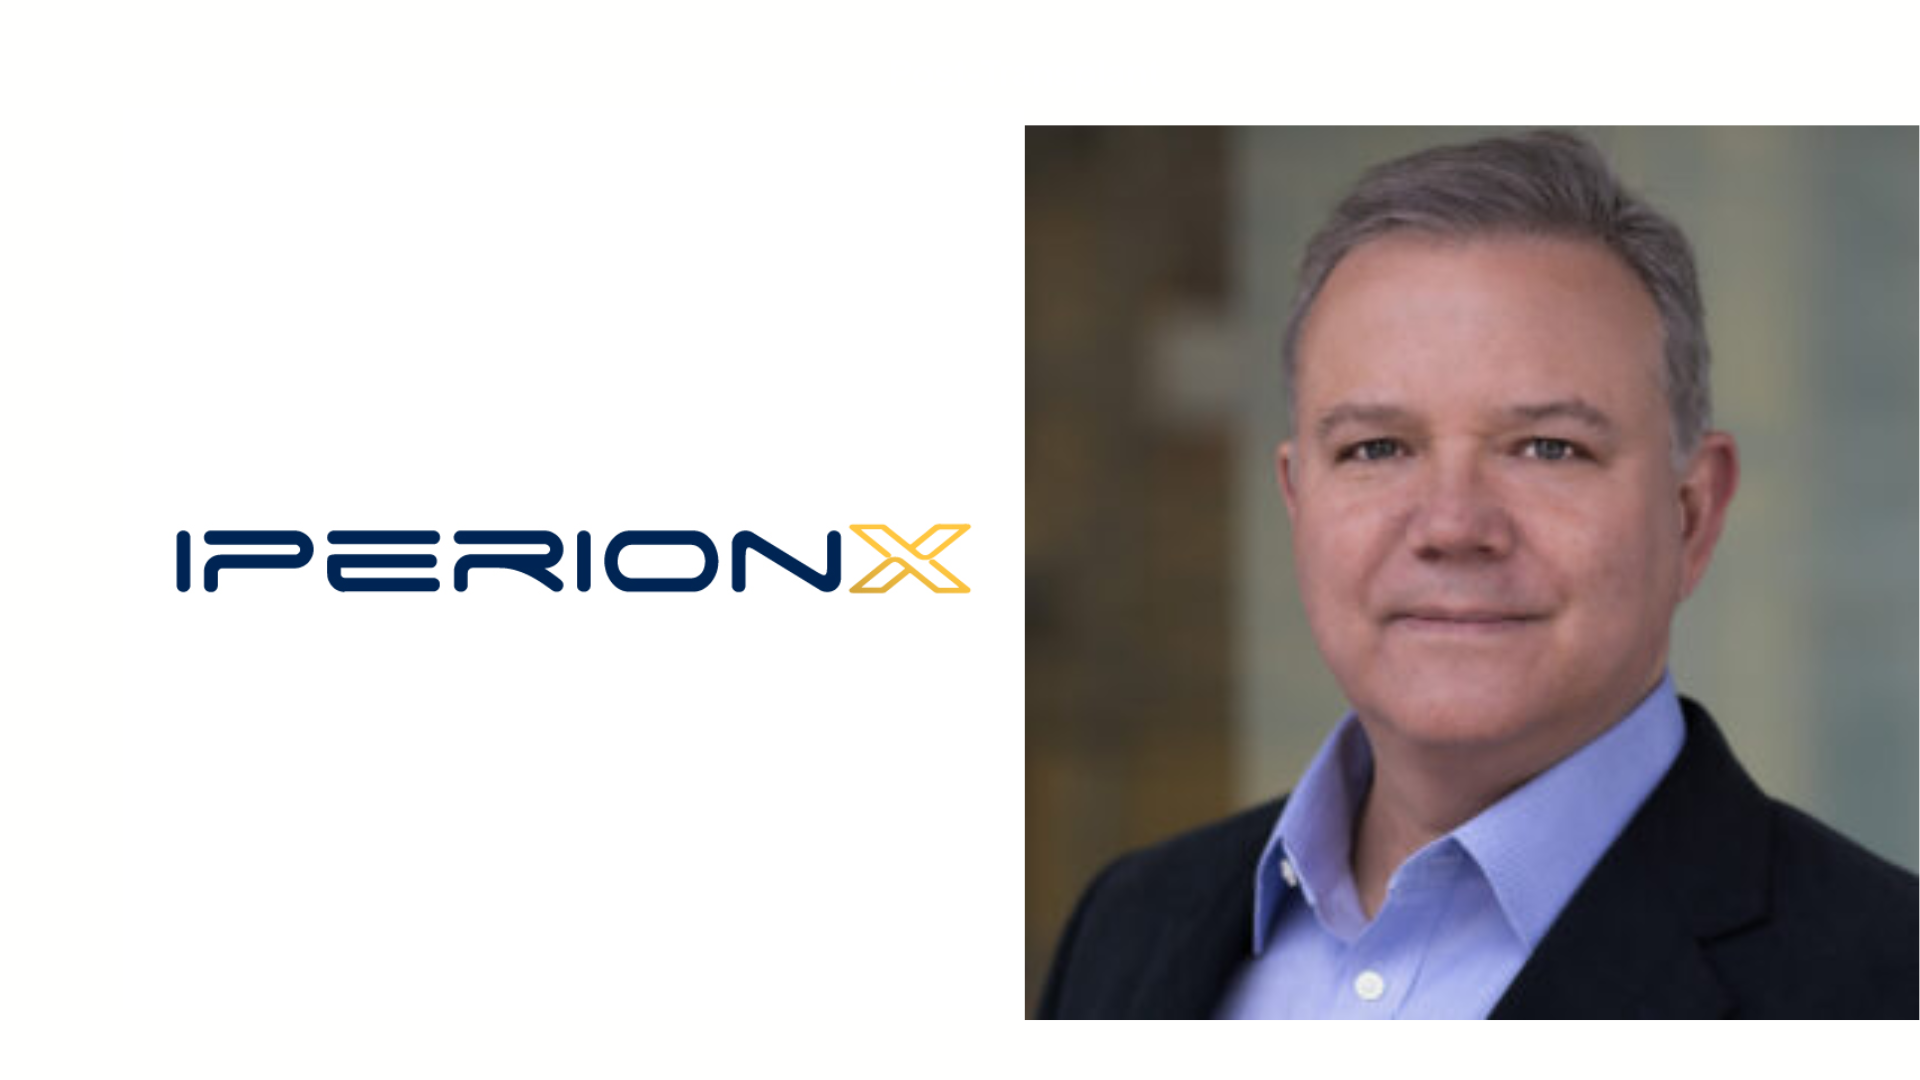 IperionX Limited announced the appointment of Toby Symonds, an executive with more than 30 years experience, as President of IperionX